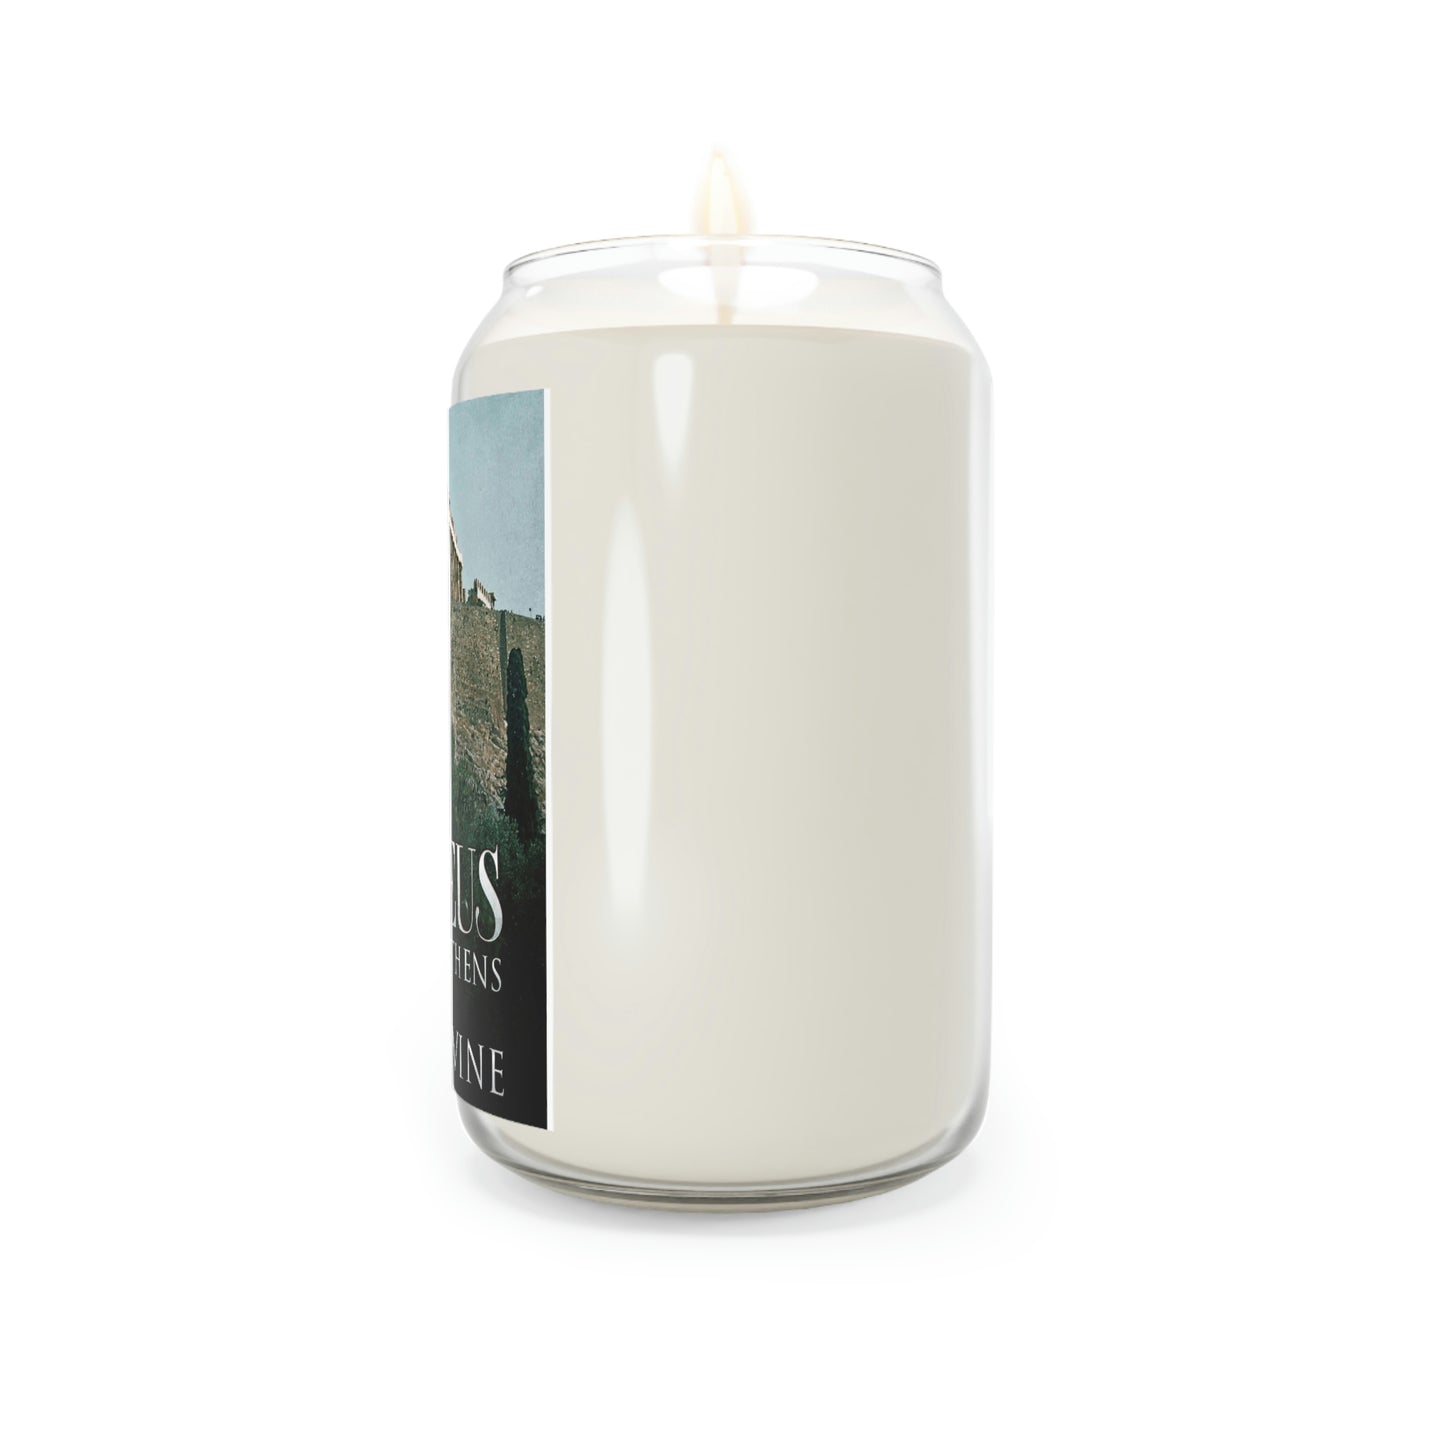 Theseus - Scented Candle